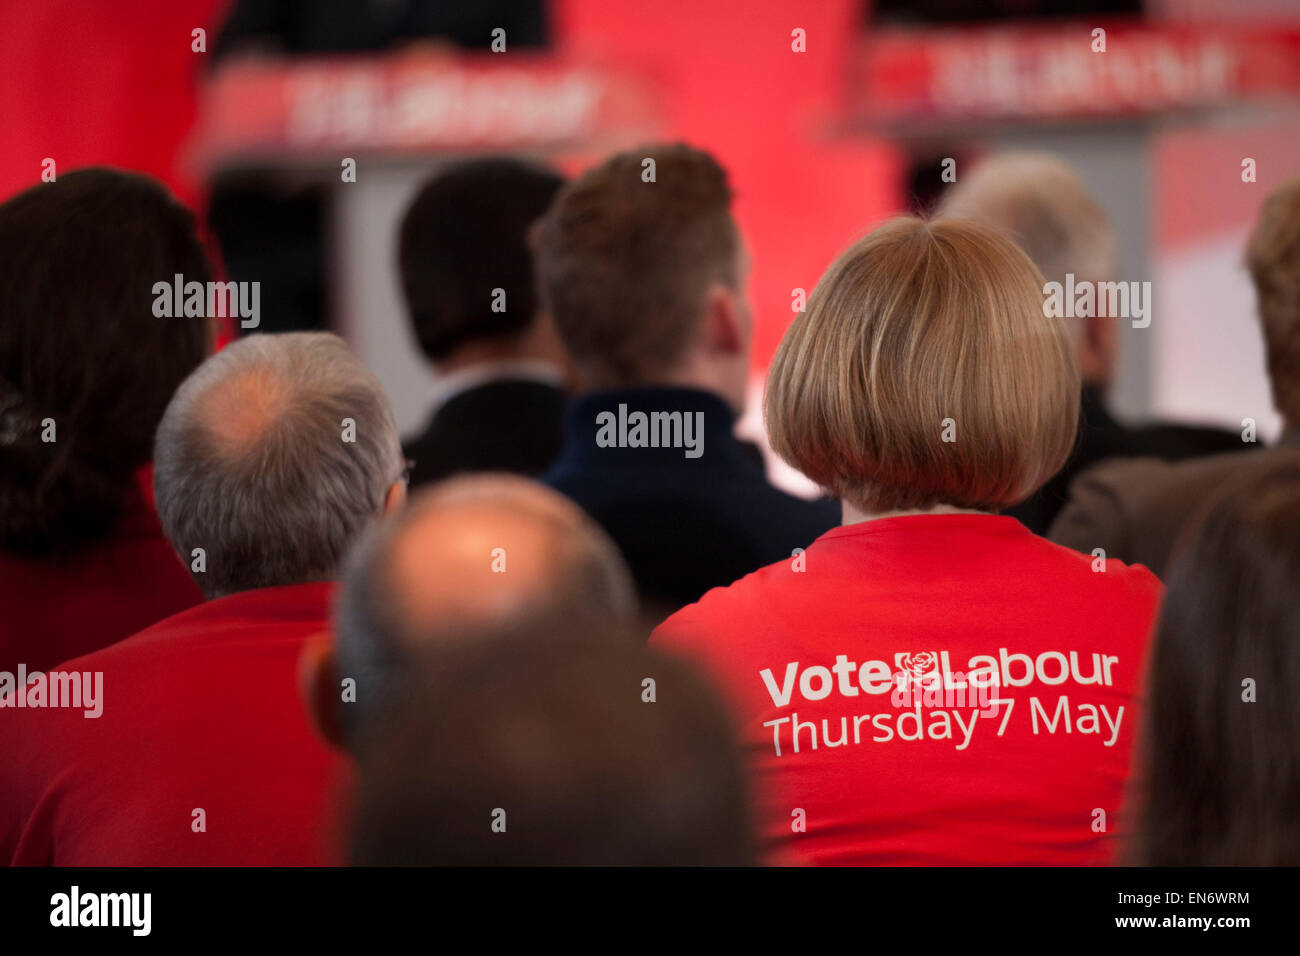 London, UK. Wednesday 29th April 2015. Labour Party supporter wearing a 'Vote Labour Thursday 7th May' t-shirt at a General Election 2015 campaign event on the Tory threat to family finances, entitled: The Tories’ Secret Plan. Held at the Royal Institute of British Architects. Credit:  Michael Kemp/Alamy Live News Stock Photo